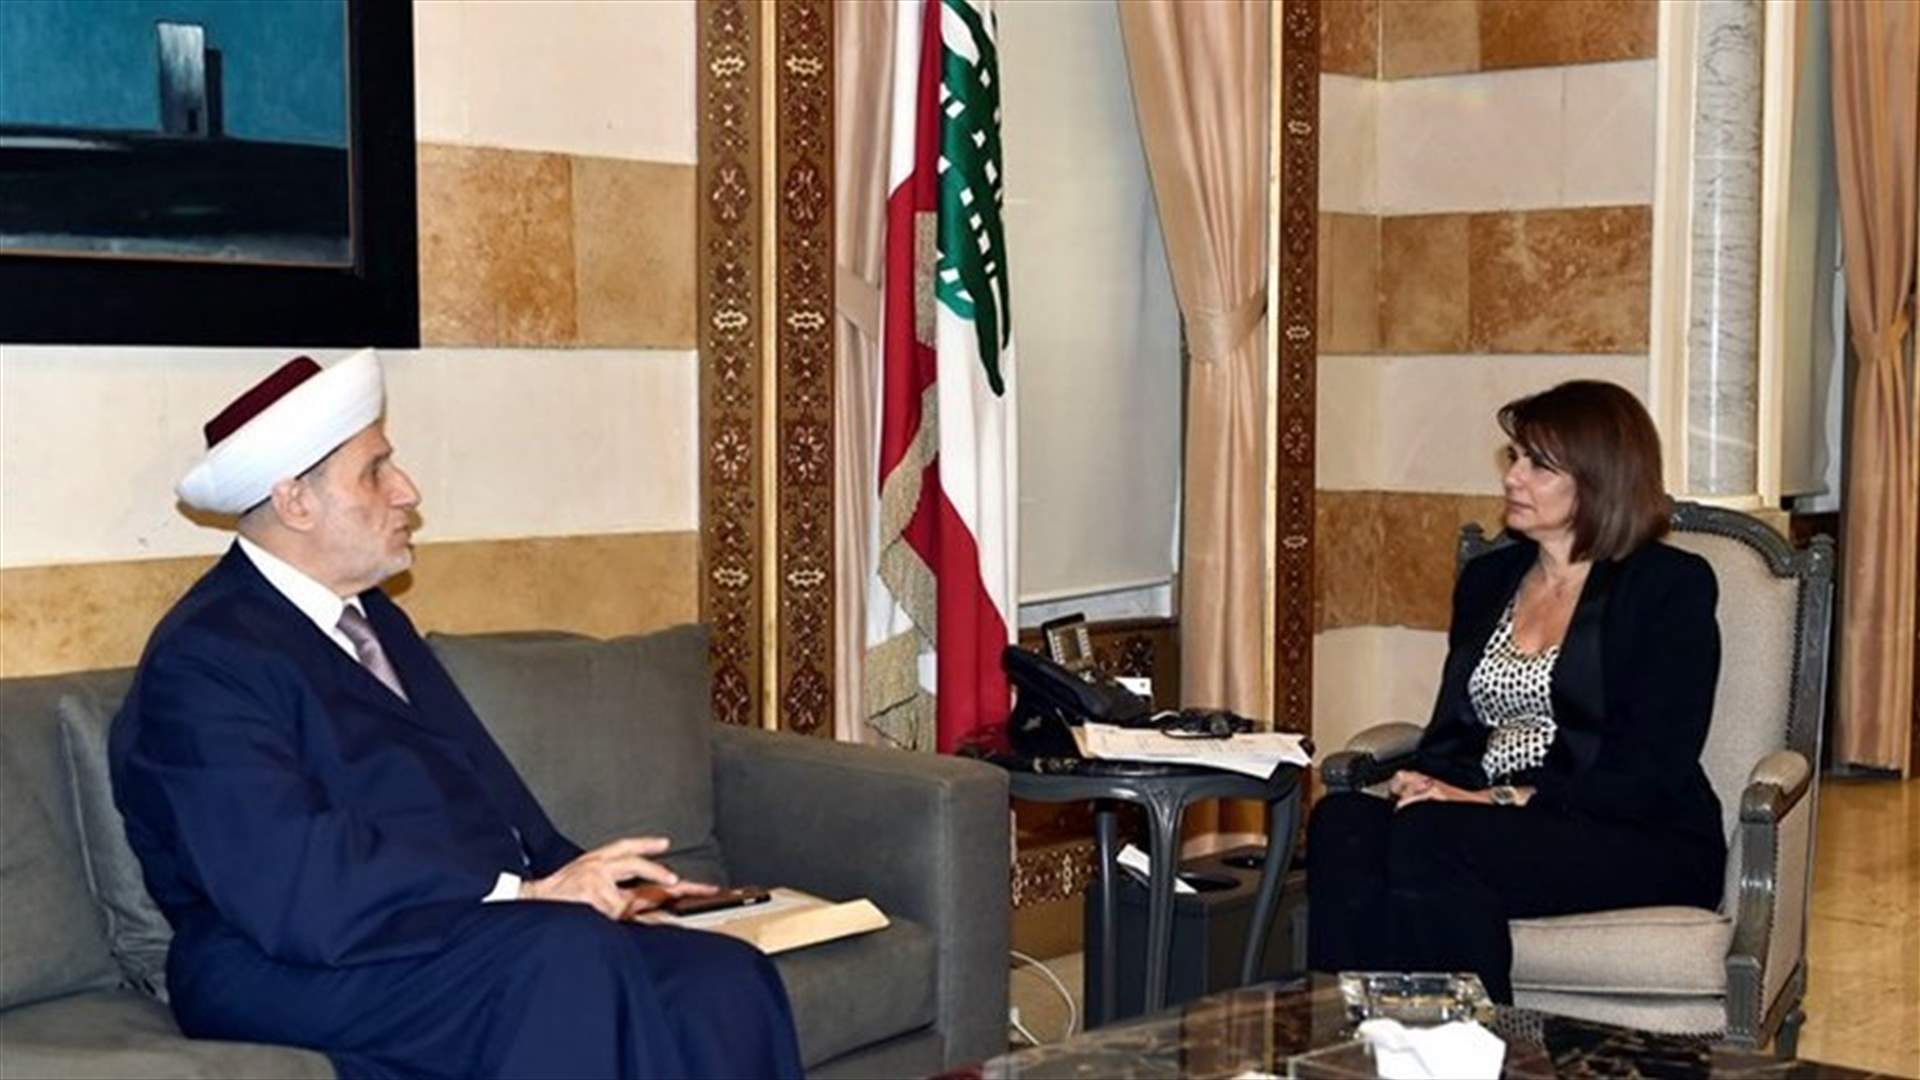 Minister al-Hassan meets with Mufti al-Chaar, discussed Tripoli situation